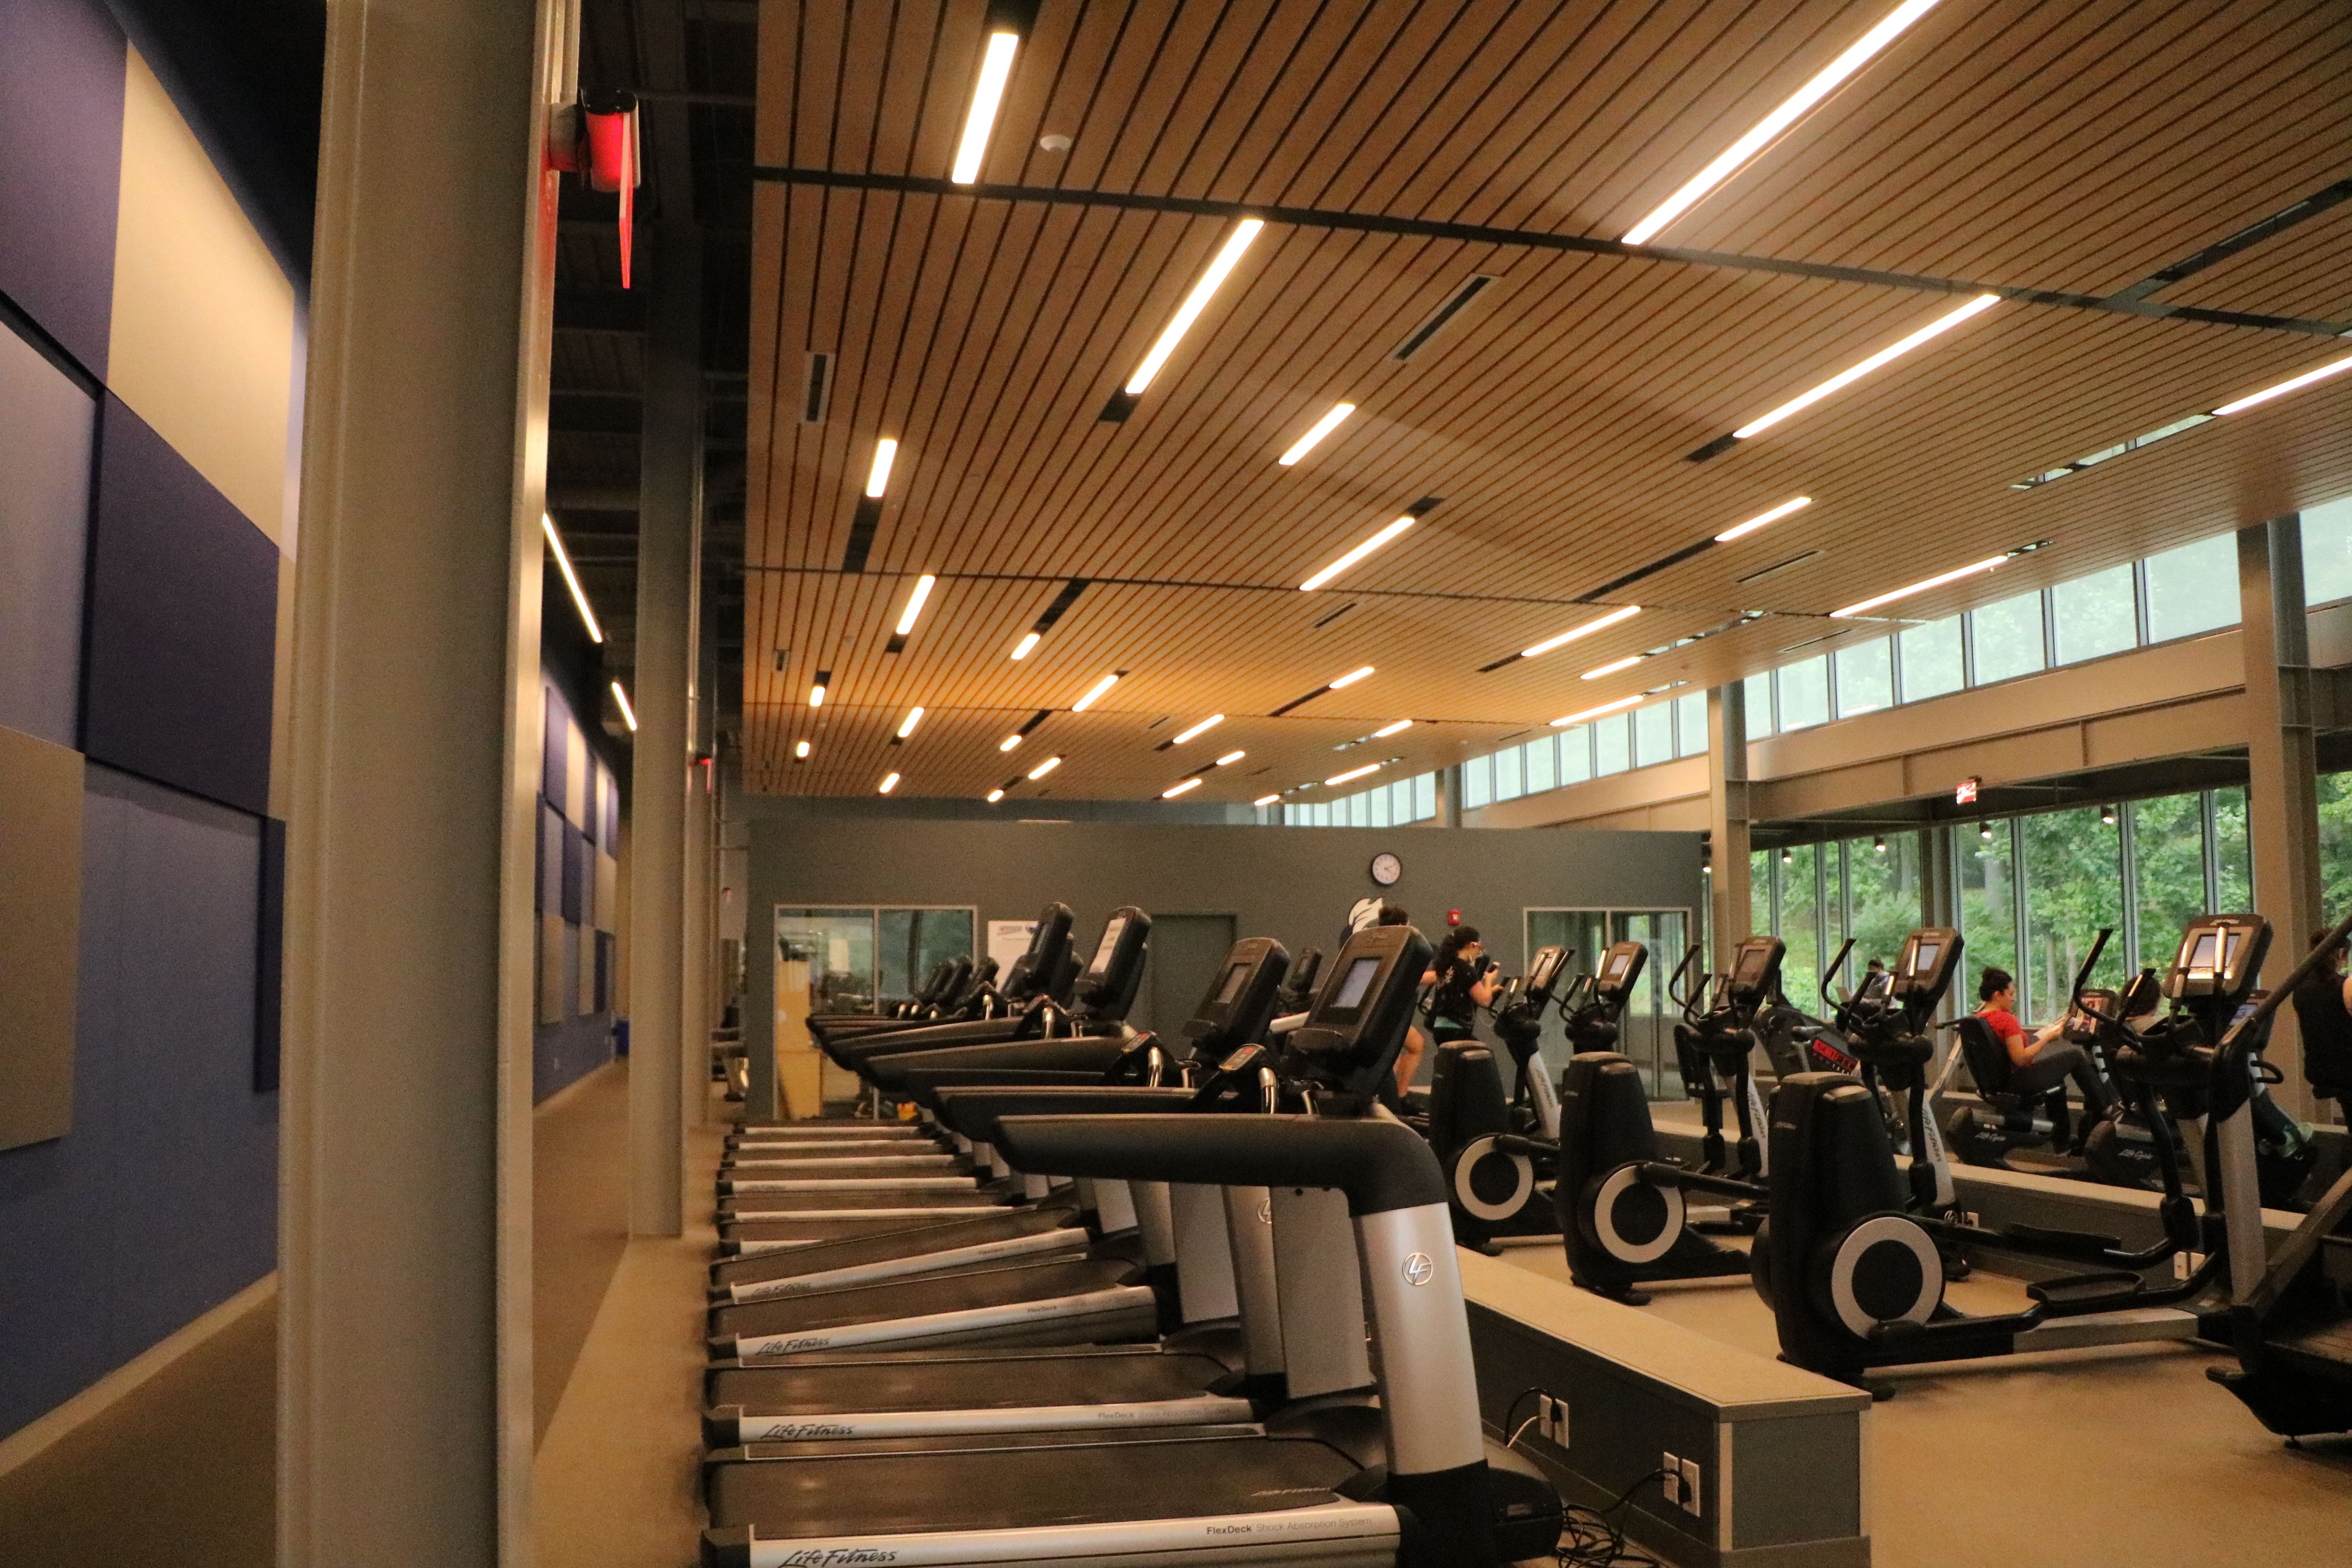 Upgrades to the Dixon center brought new gym equipment.